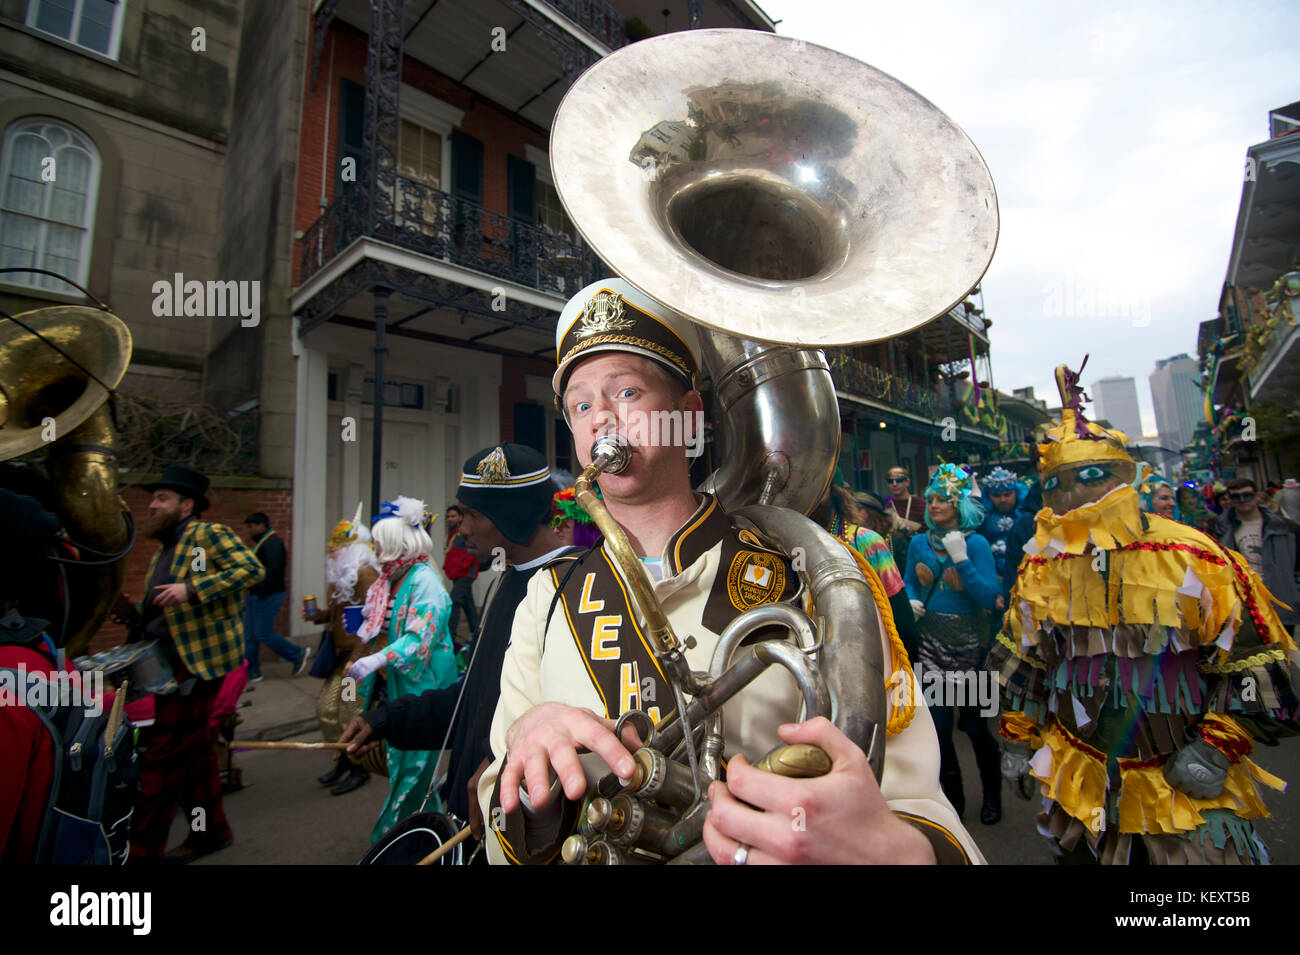 A brass band leads a second line parade in New Orleans, Louisiana on Mardi Gras Day Stock Photo